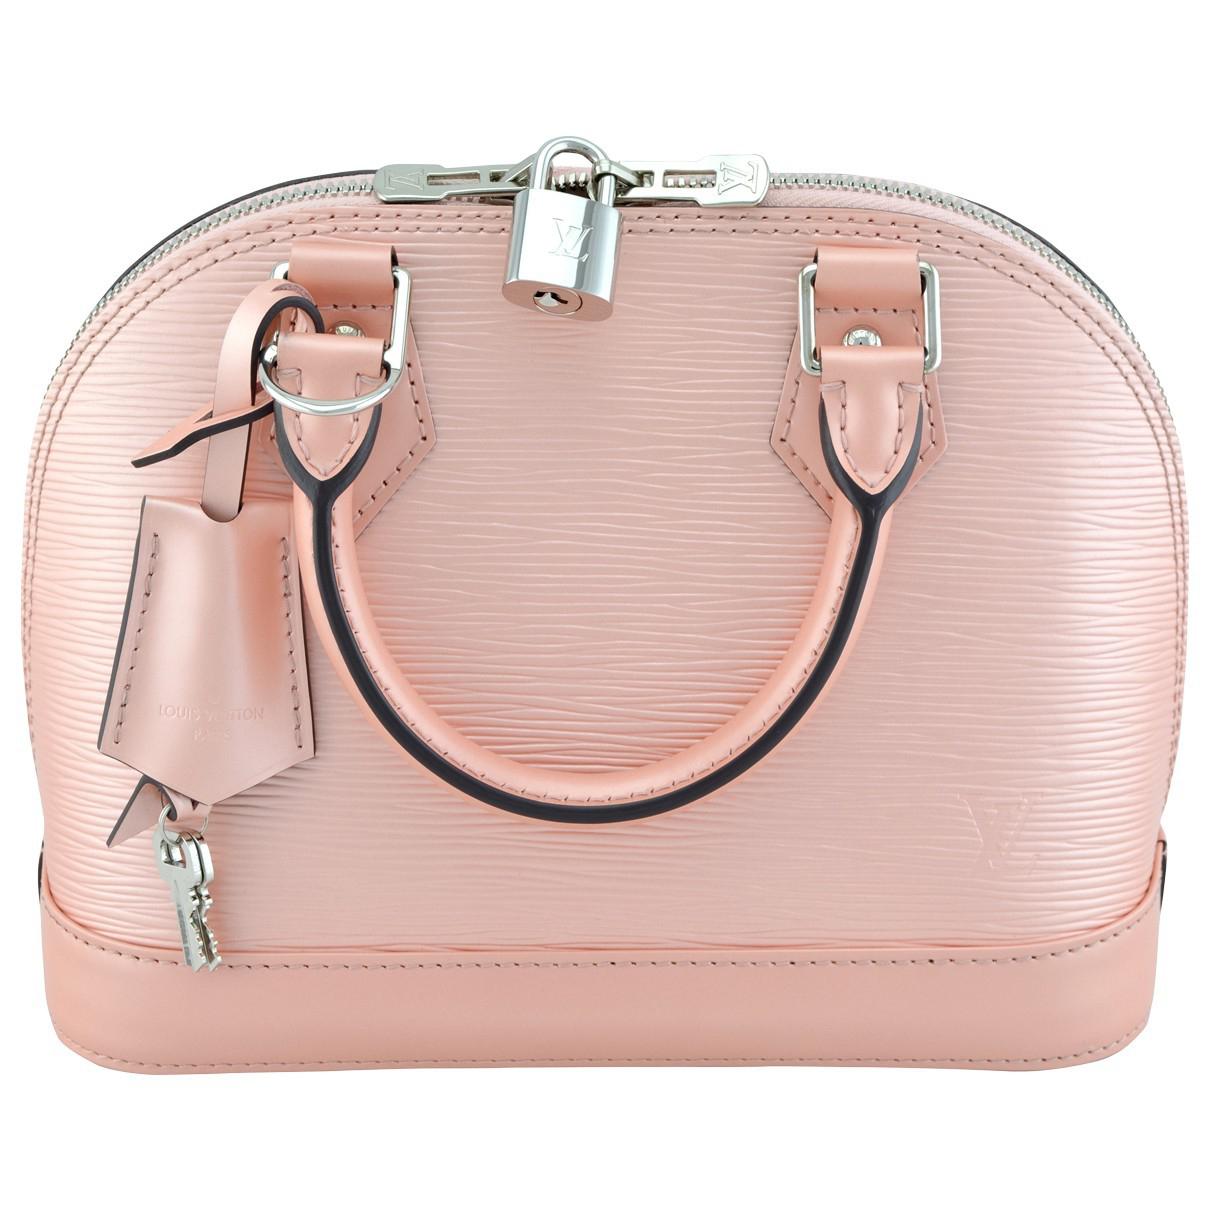 Louis Vuitton Alma Bb Leather Crossbody Bag in Pink - Lyst